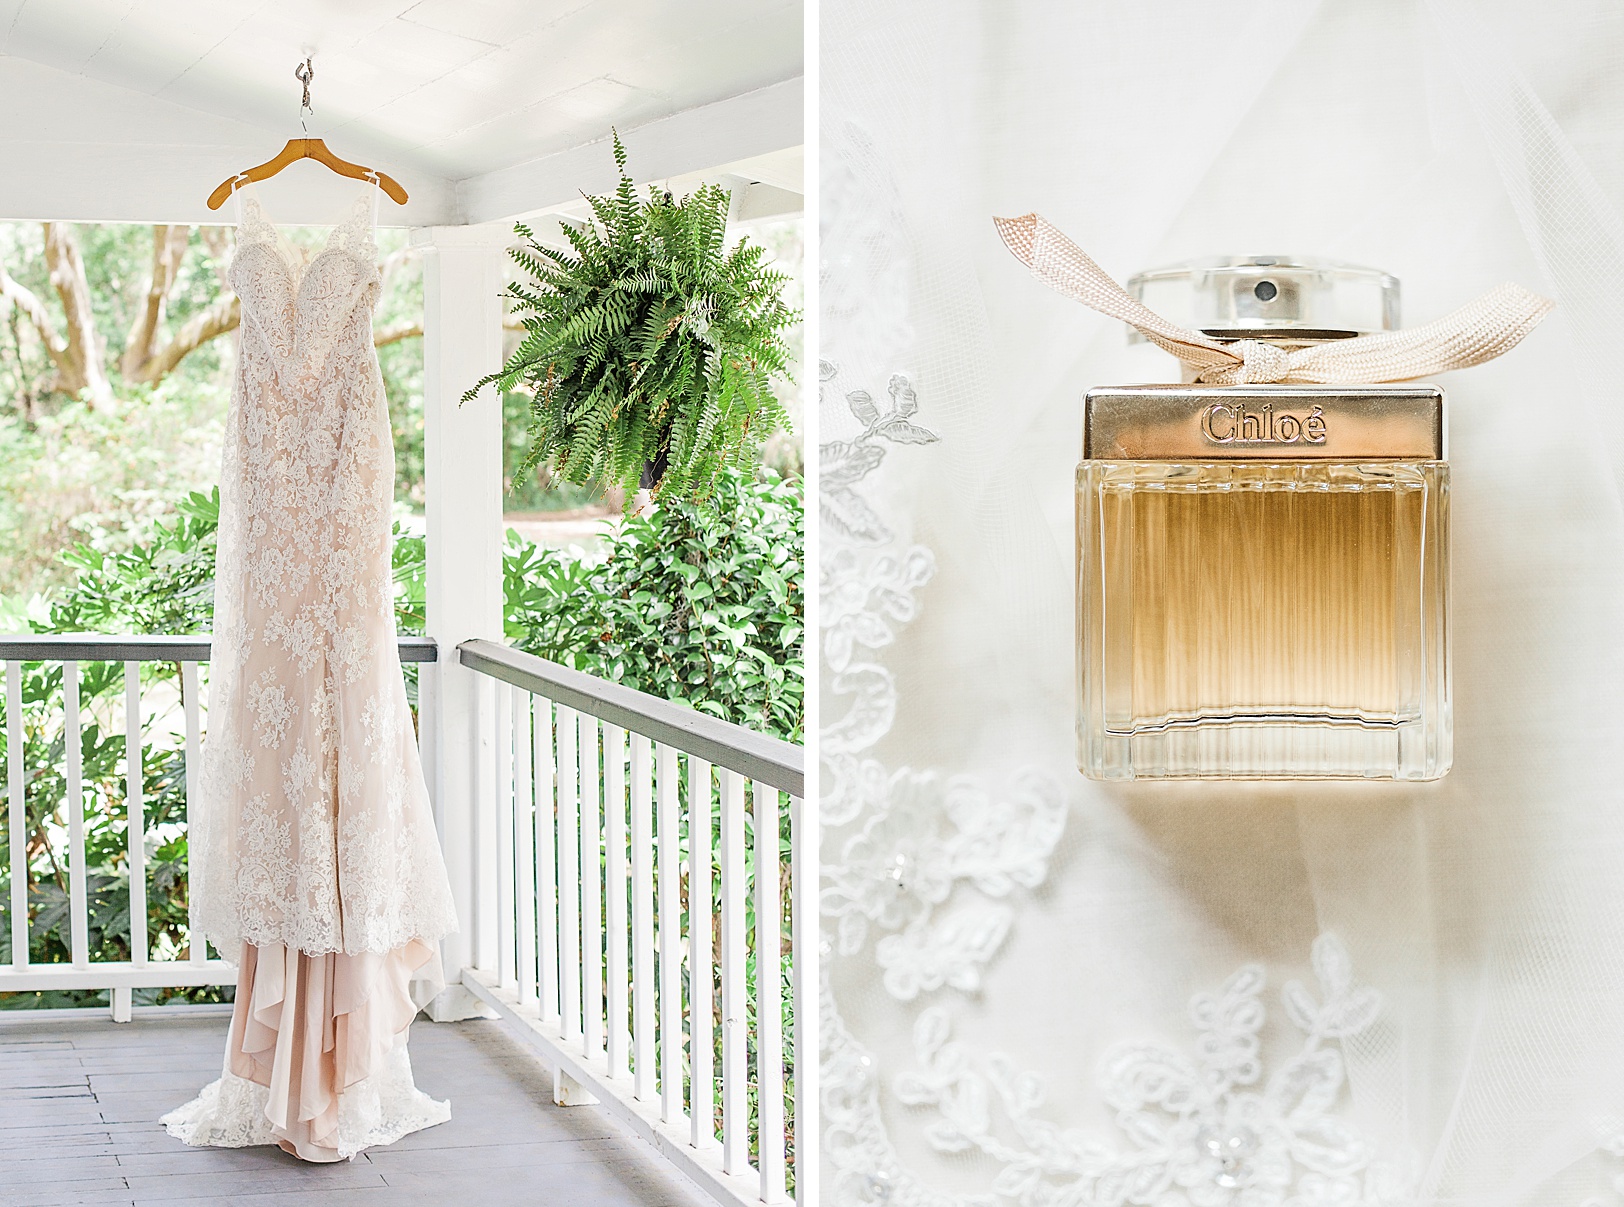 Wingate Plantation Wedding Dress and Perfume | Details by Kaitlin Scott Photography